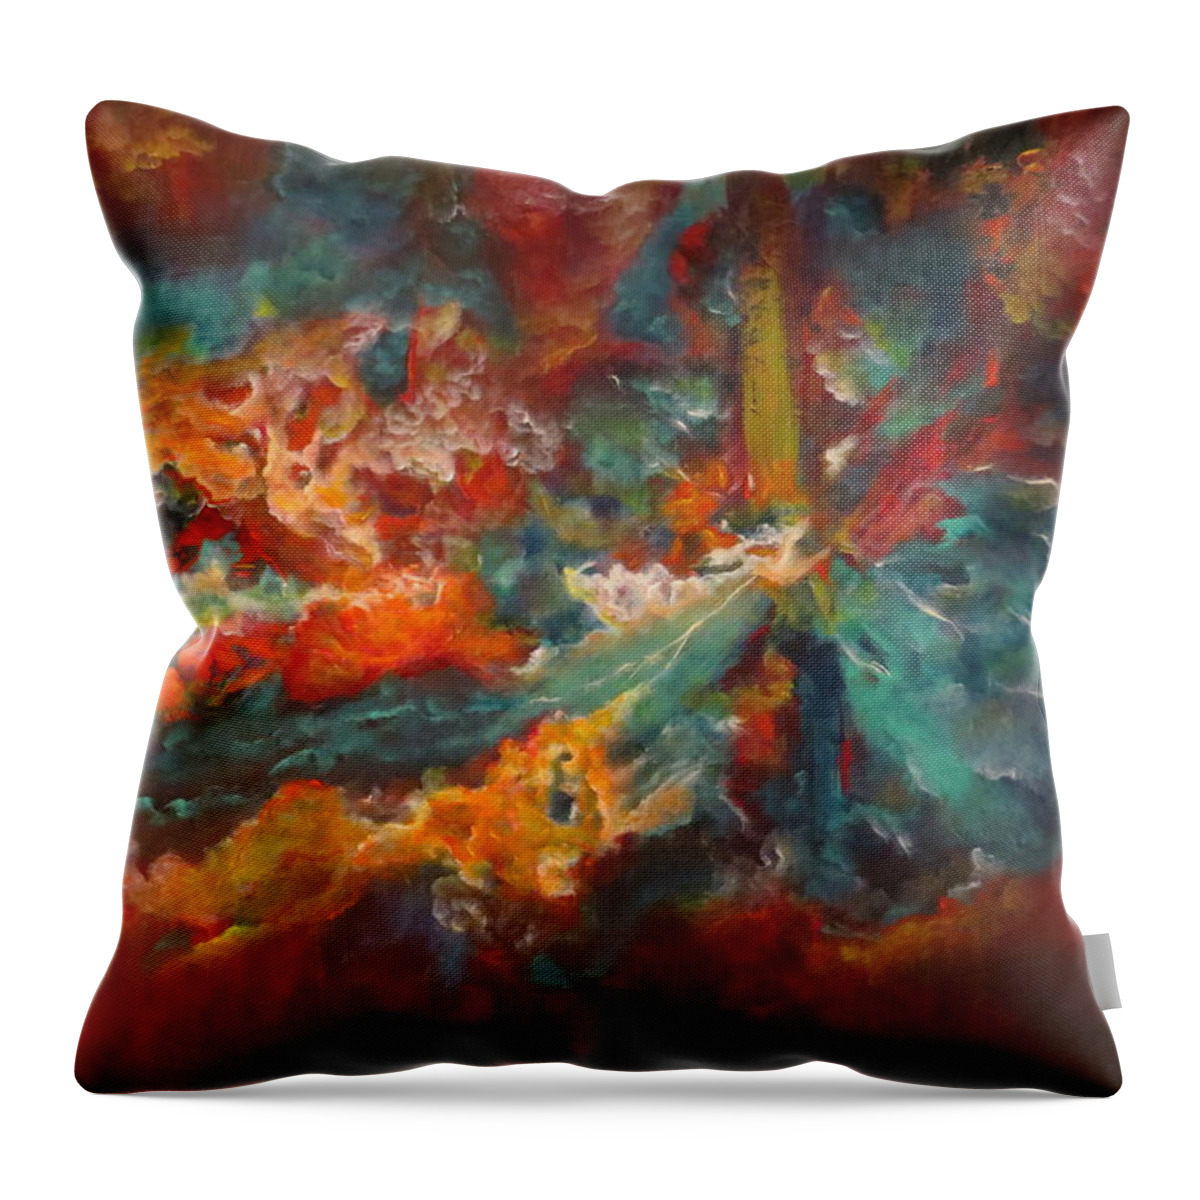 Abstract Throw Pillow featuring the painting The Source by Soraya Silvestri